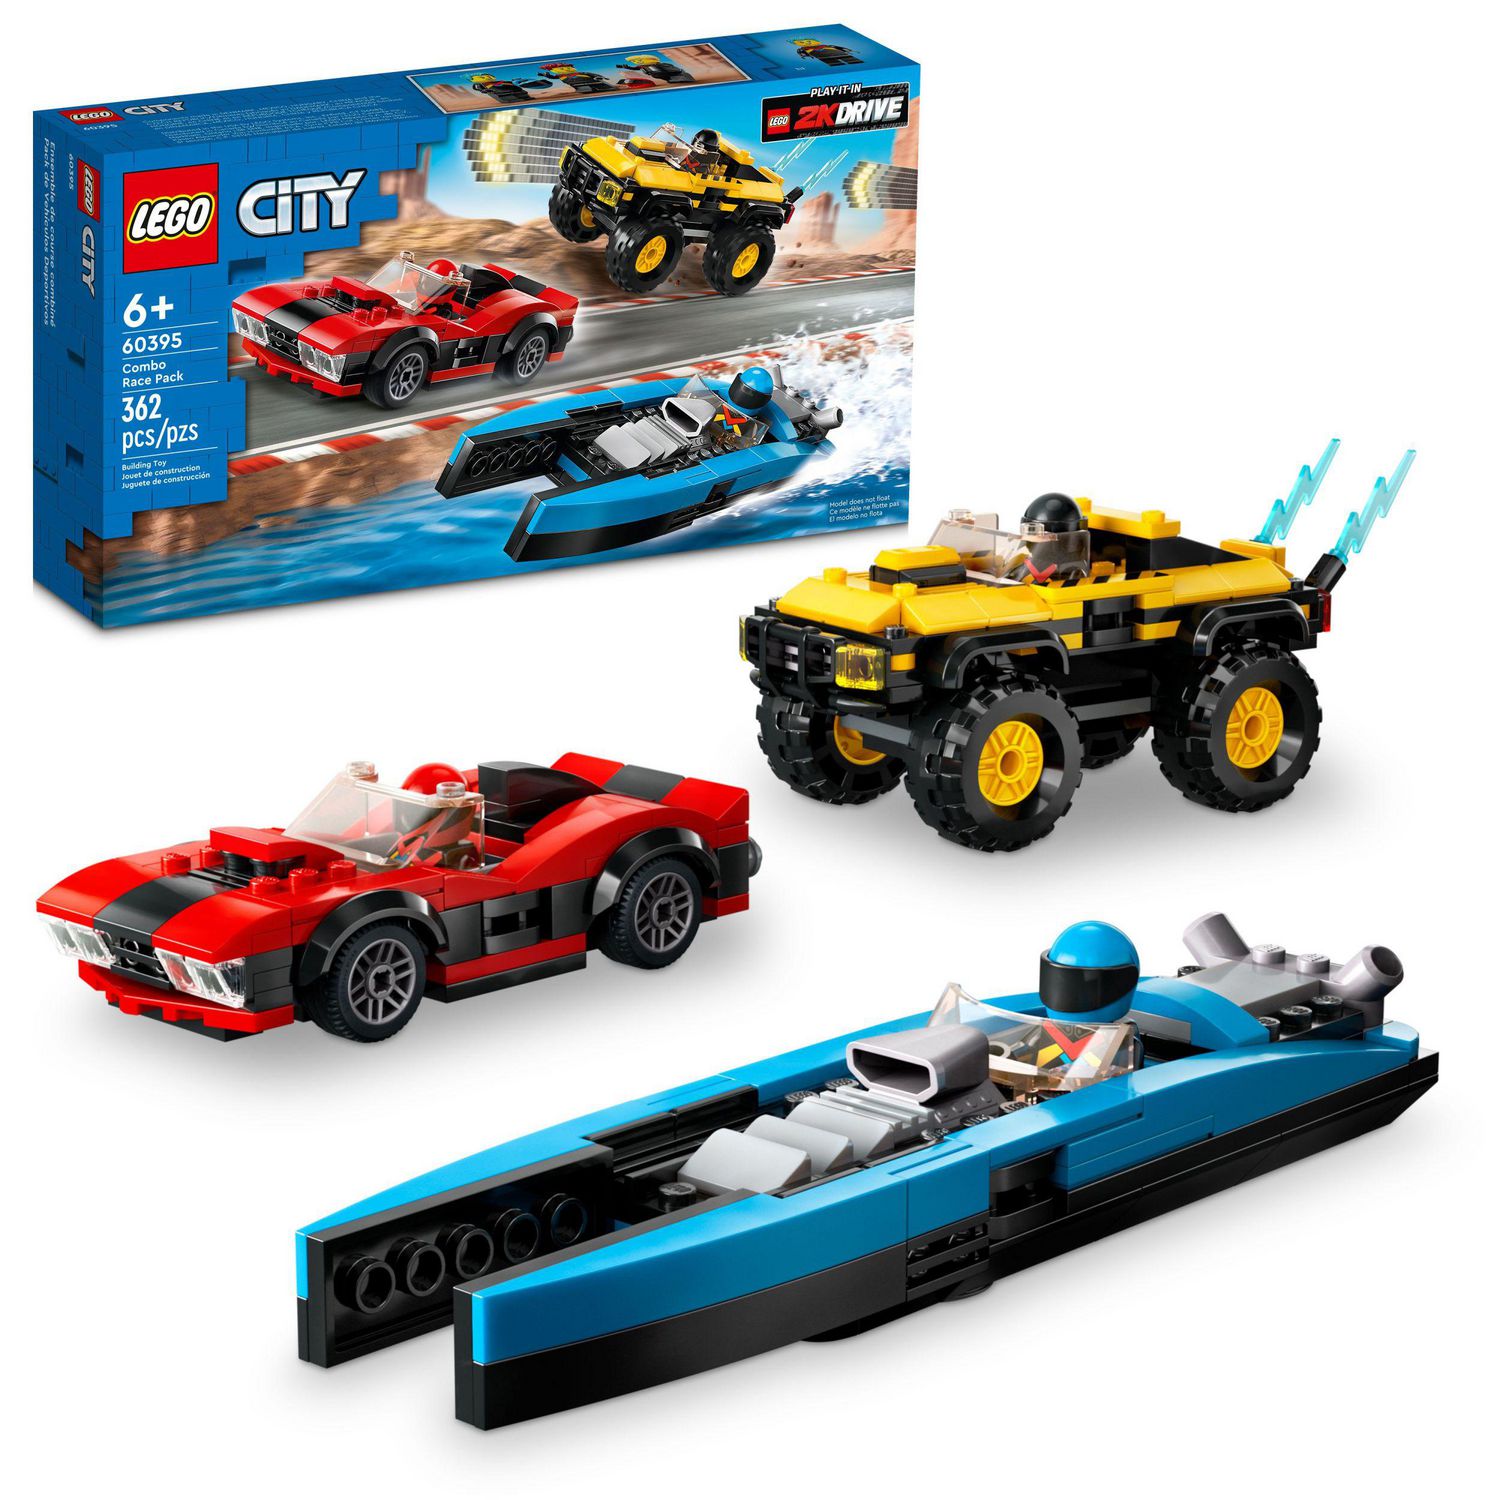 LEGO City Combo Race Pack 60395 Toy Car Building Set, Includes a Sports Car,  SUV, Speedboat and 3 Minifigures, Fun Christmas Toy for 6 Year Old Boys,  Girls and Fans of the